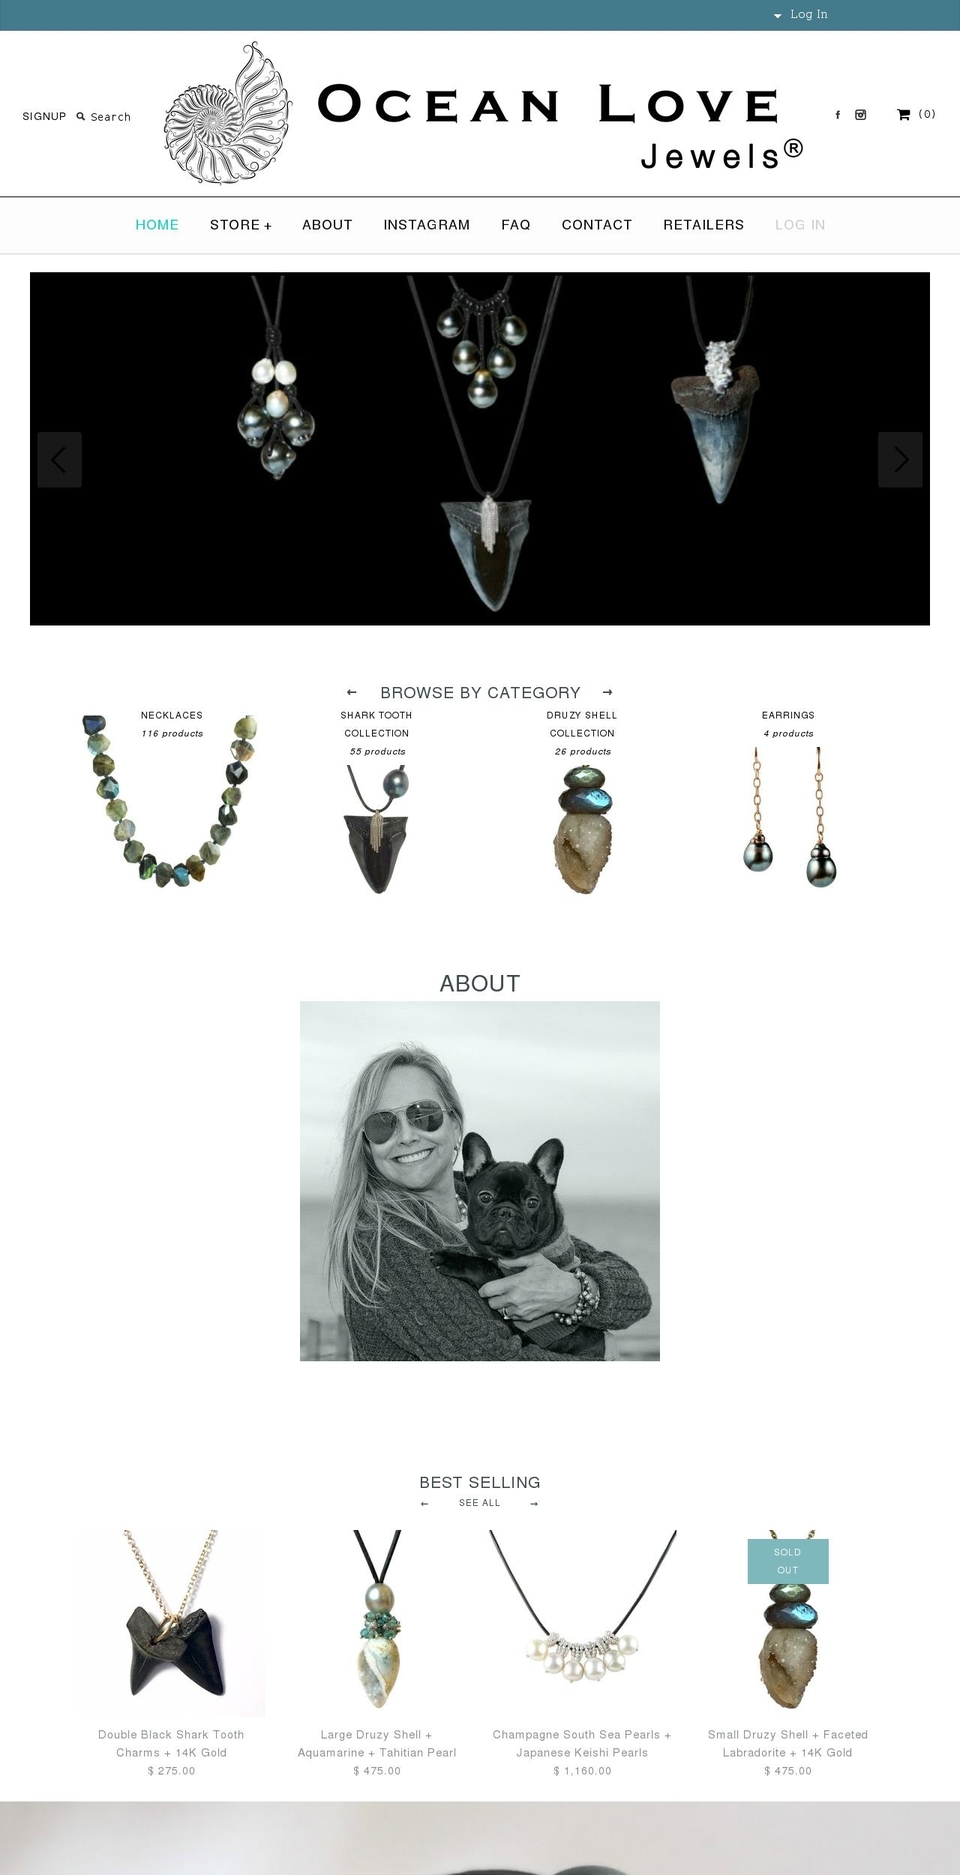 Minion Shopify theme site example oceanlovejewels.com